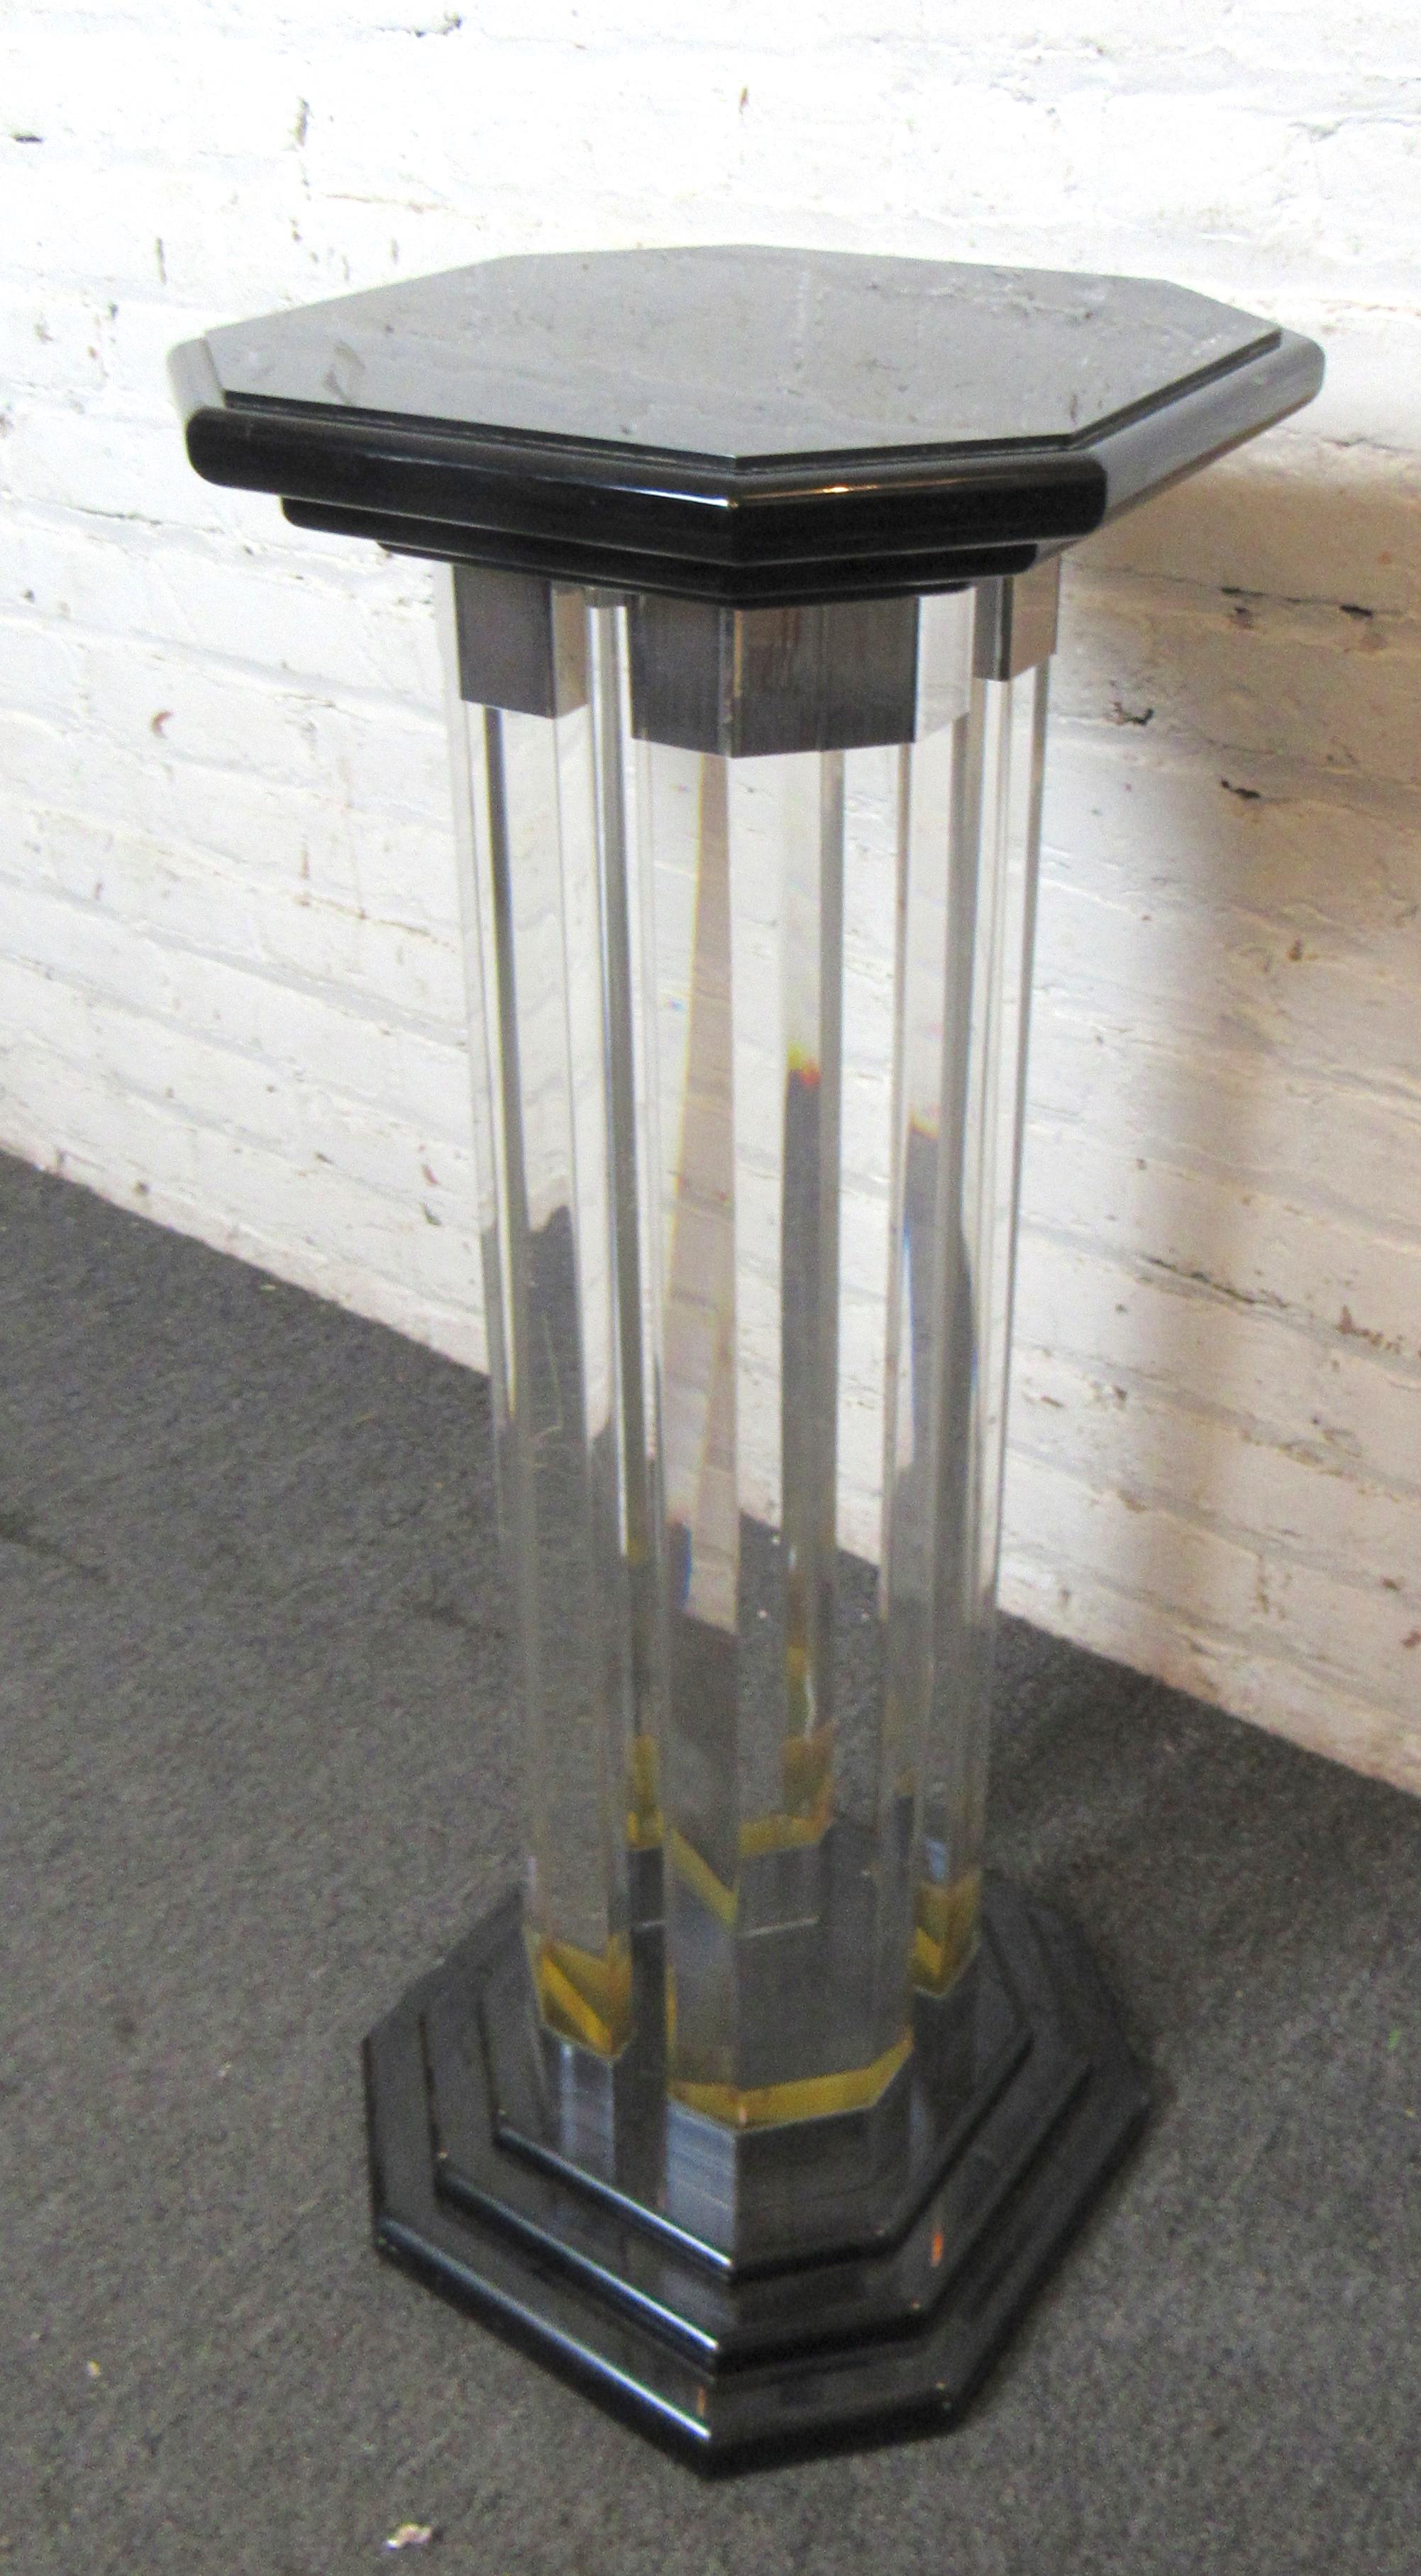 Tall vintage pedestal made of clear and black acrylic. 
(Please confirm location NY or NJ).